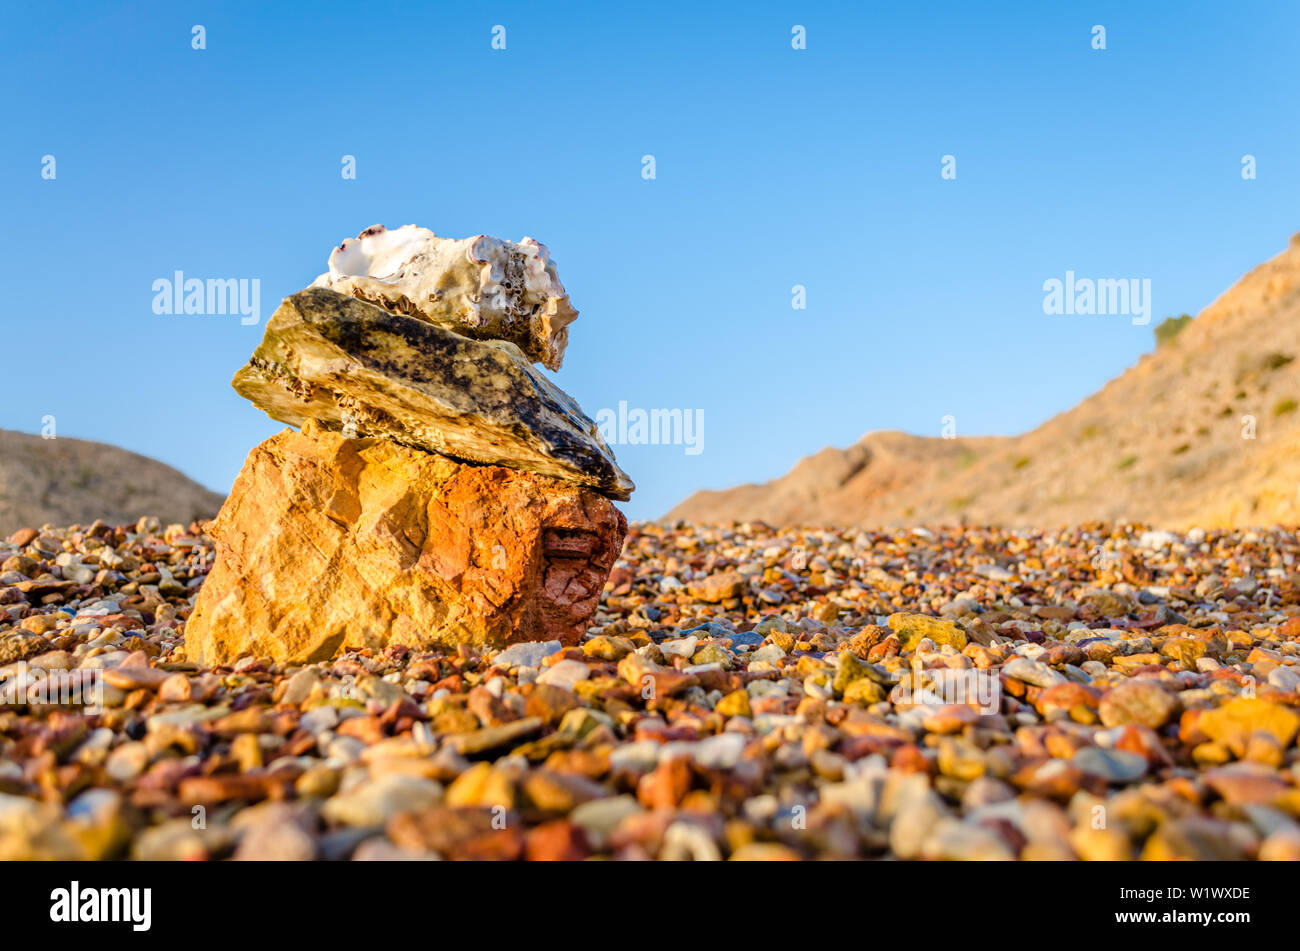 Stones, pebbles & seashells stuck on stone near the beach with clear blue sky. Low angle view from Muscat, Oman. Stock Photo